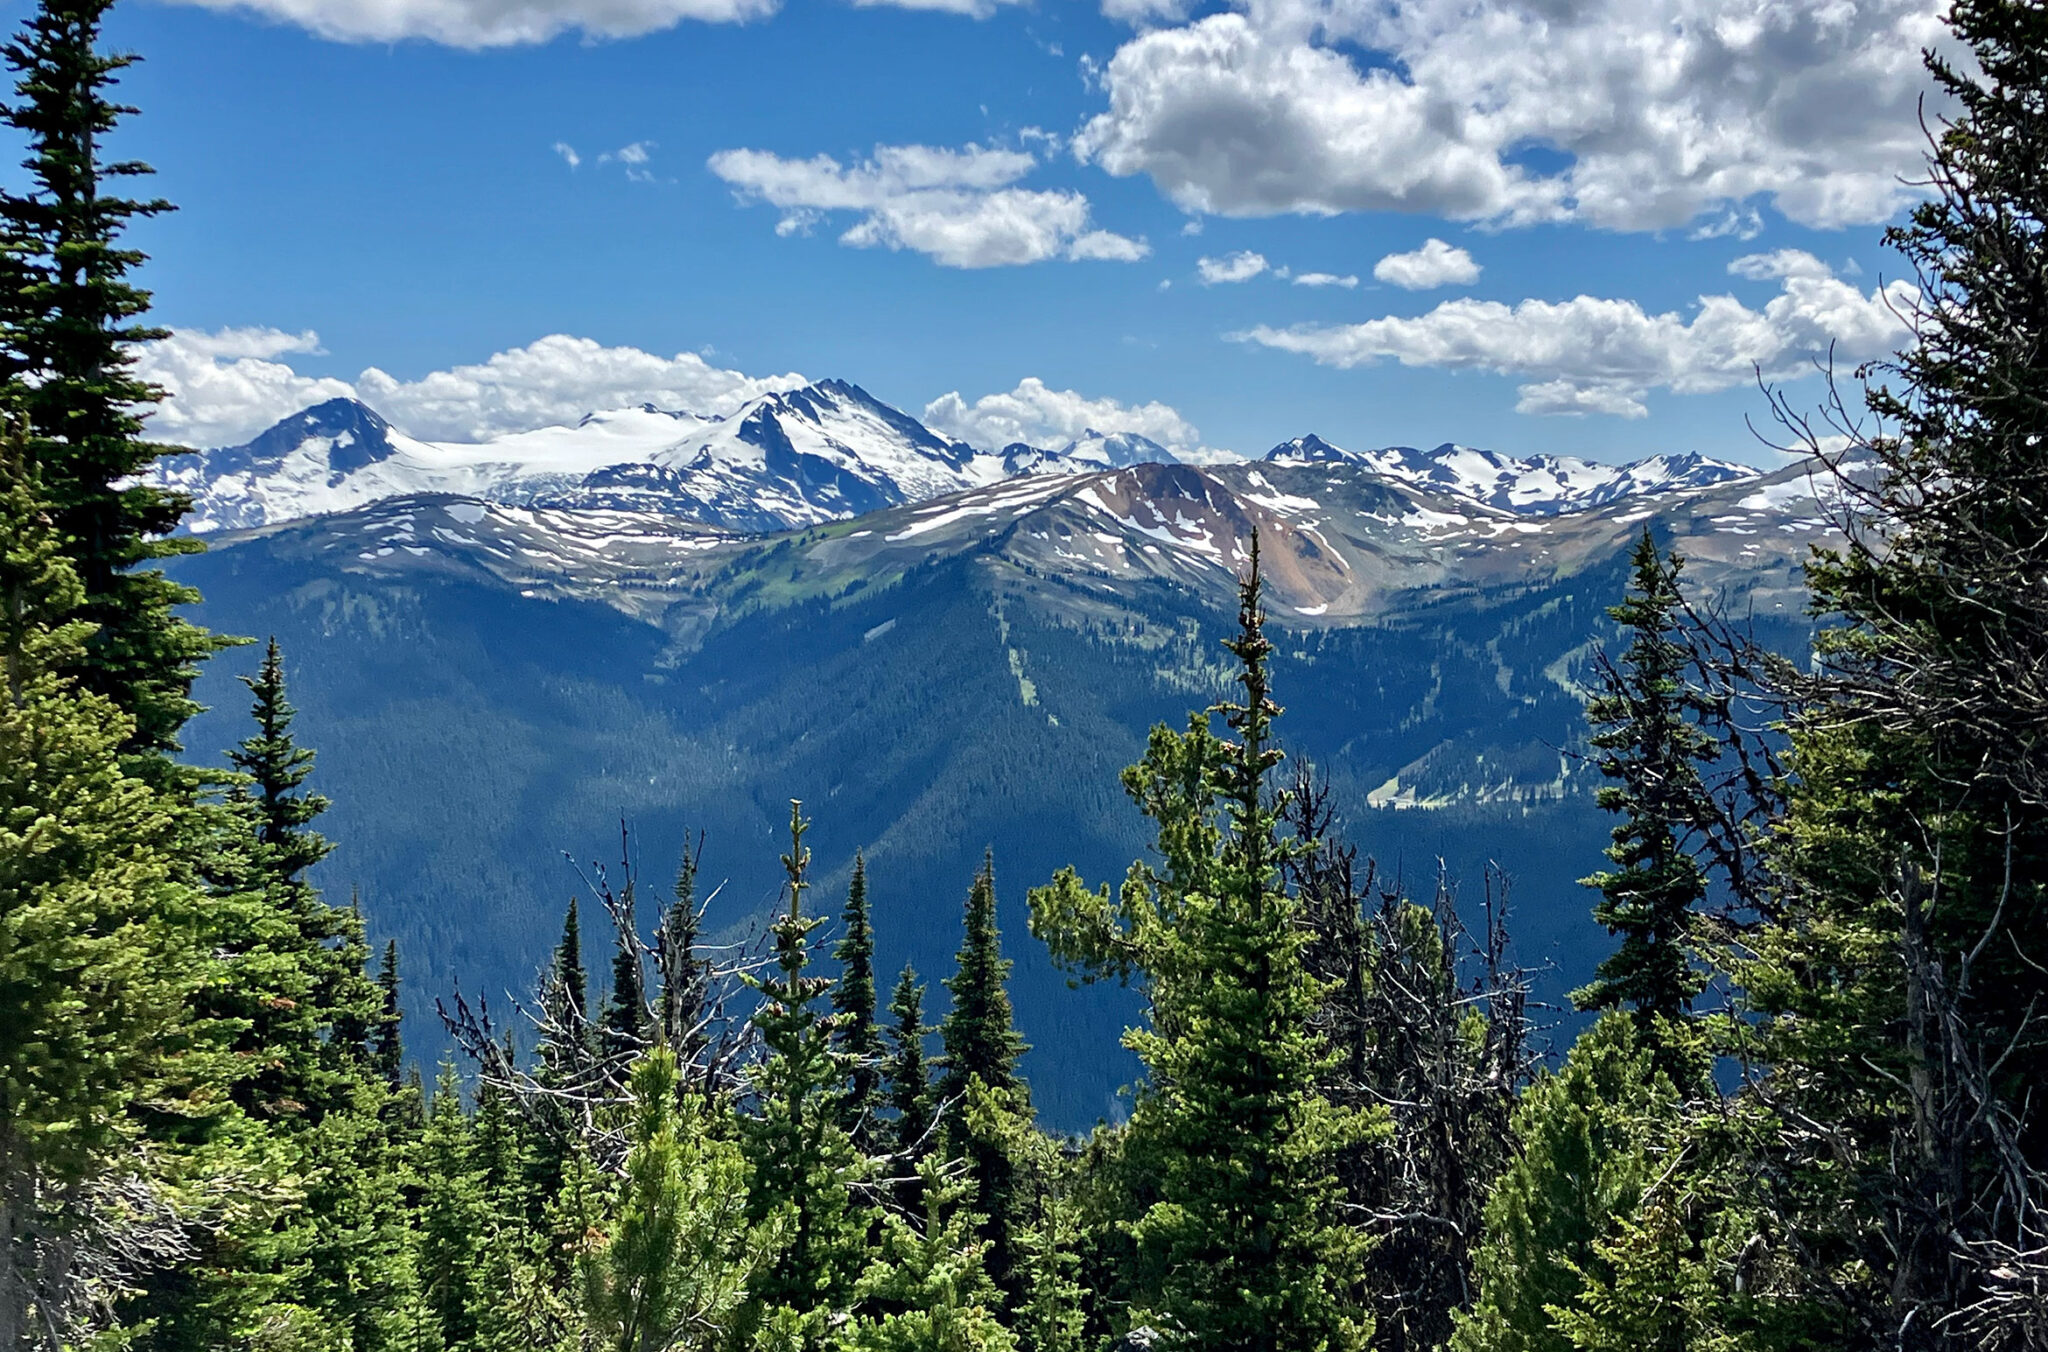 The mountain view from the Overlord Trail is absolutely stunning with snow-capped peaks and lush pines.